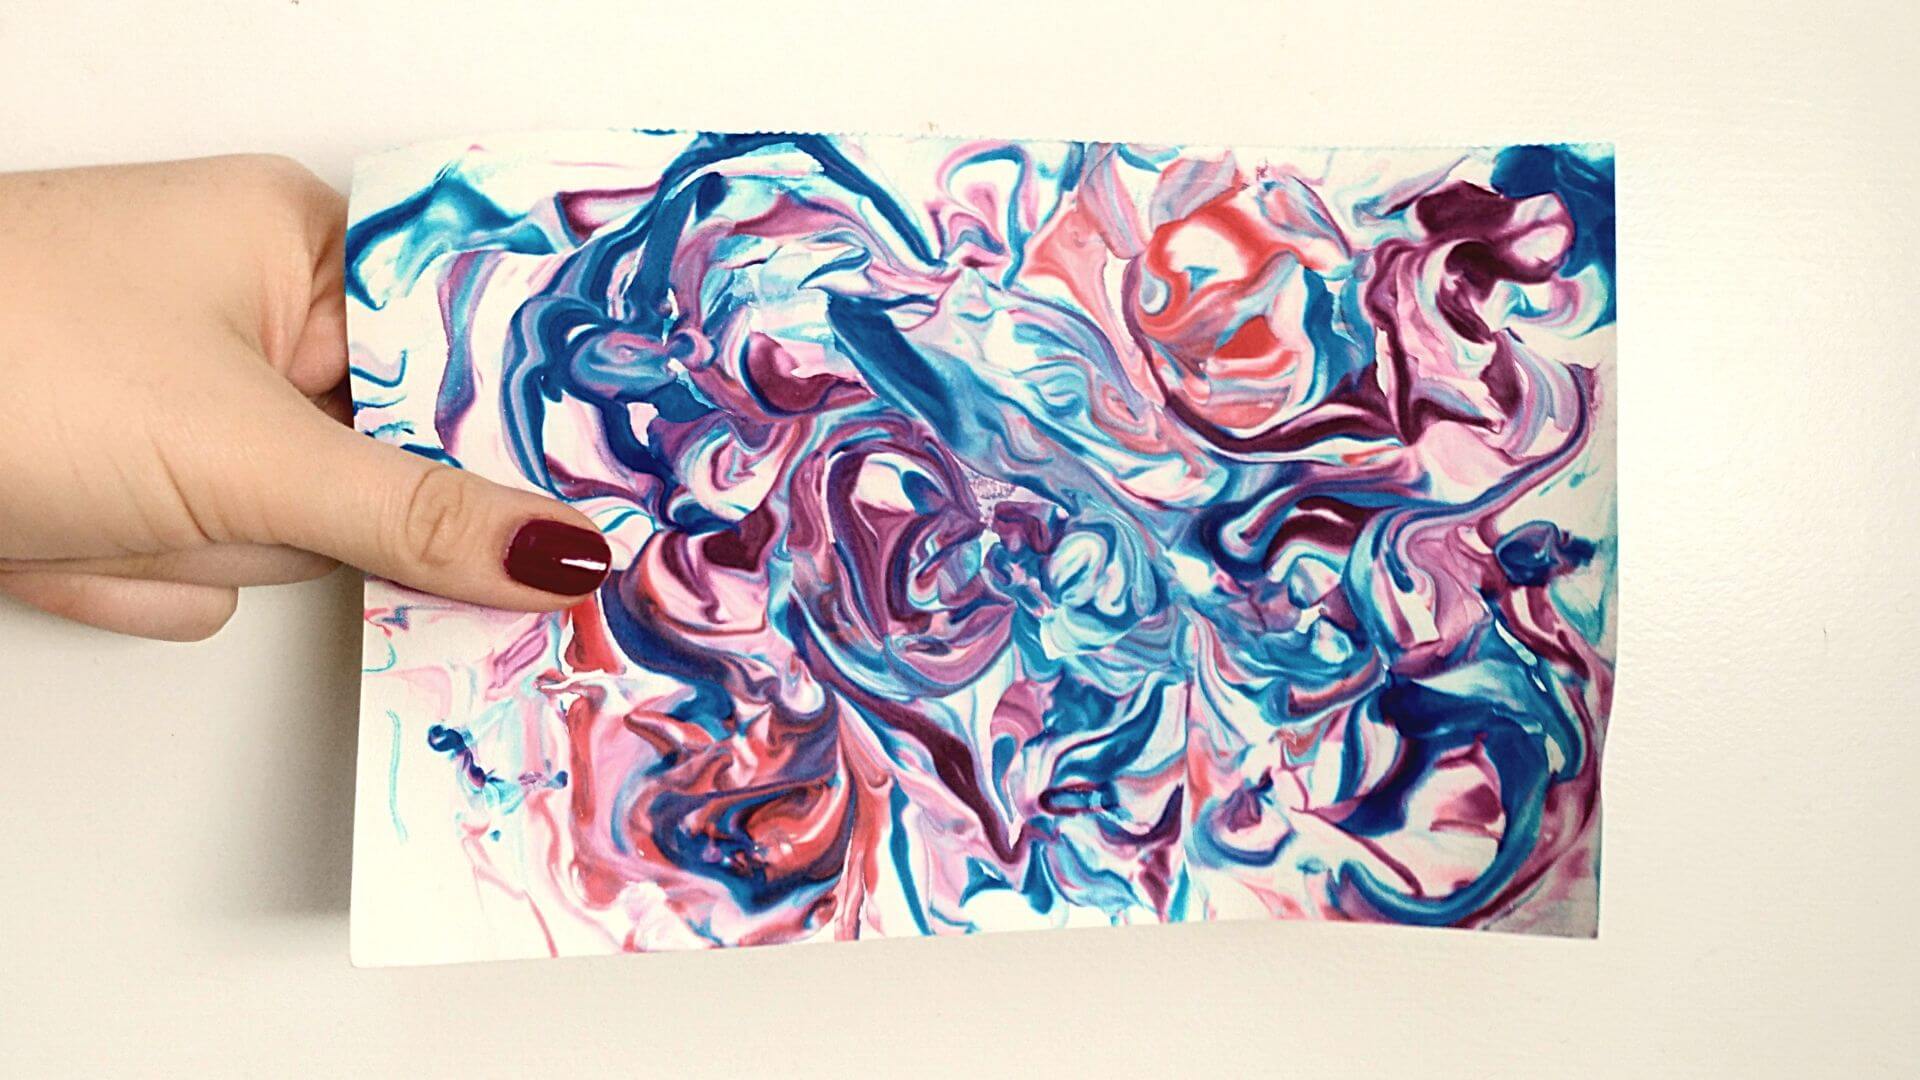 homemade gift inspired by science: a piece of blue, purple, and red marbleized paper